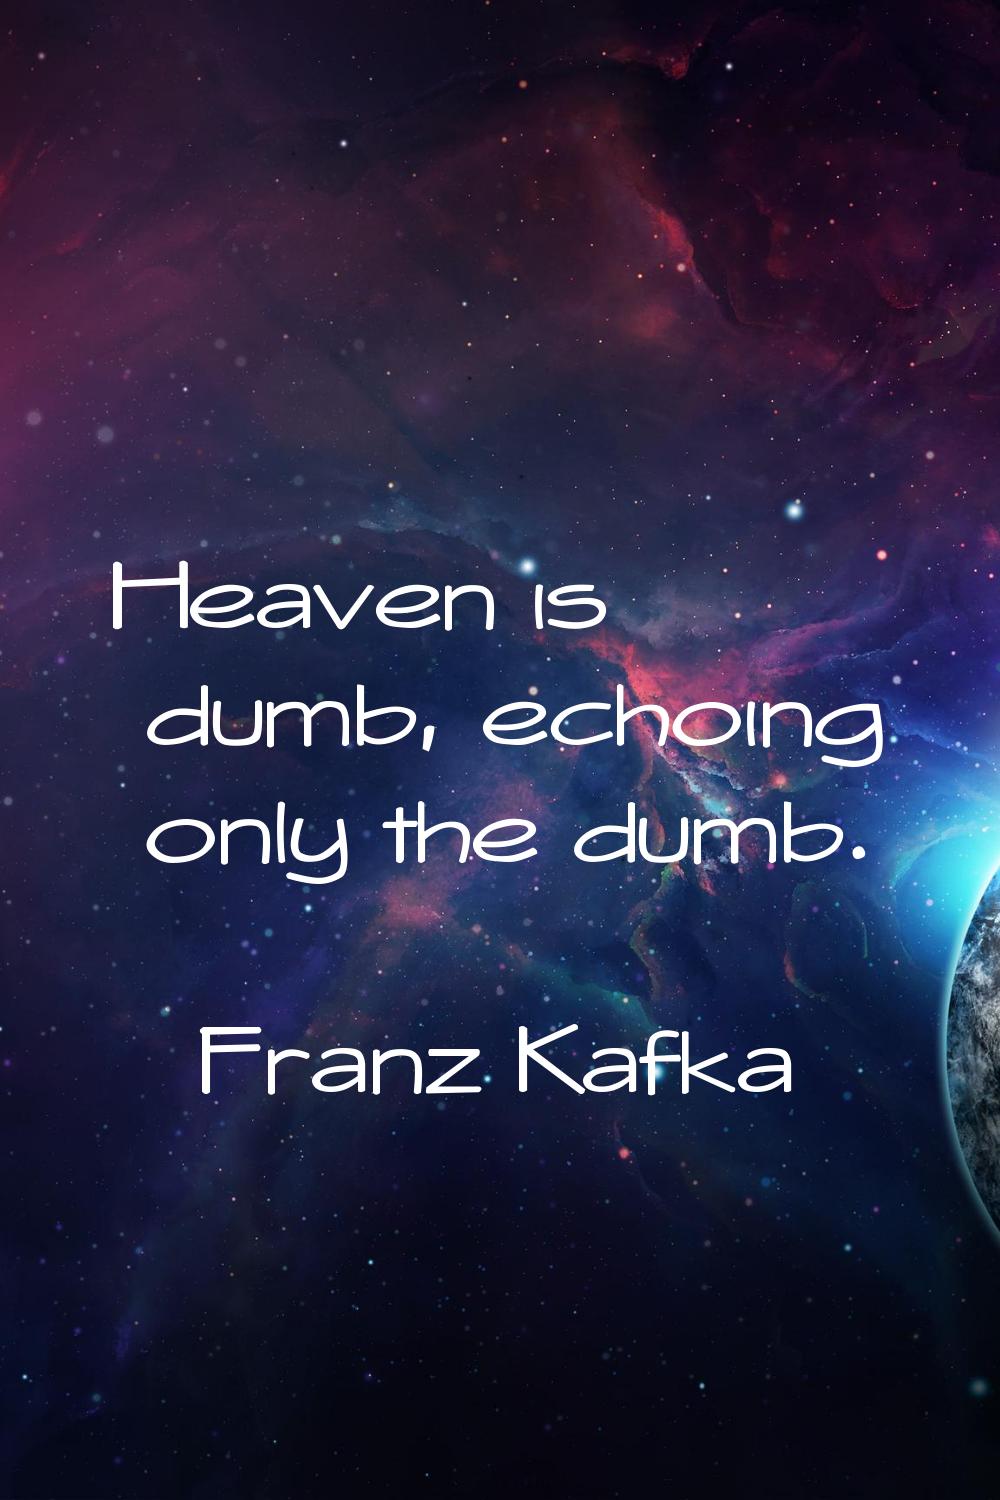 Heaven is dumb, echoing only the dumb.